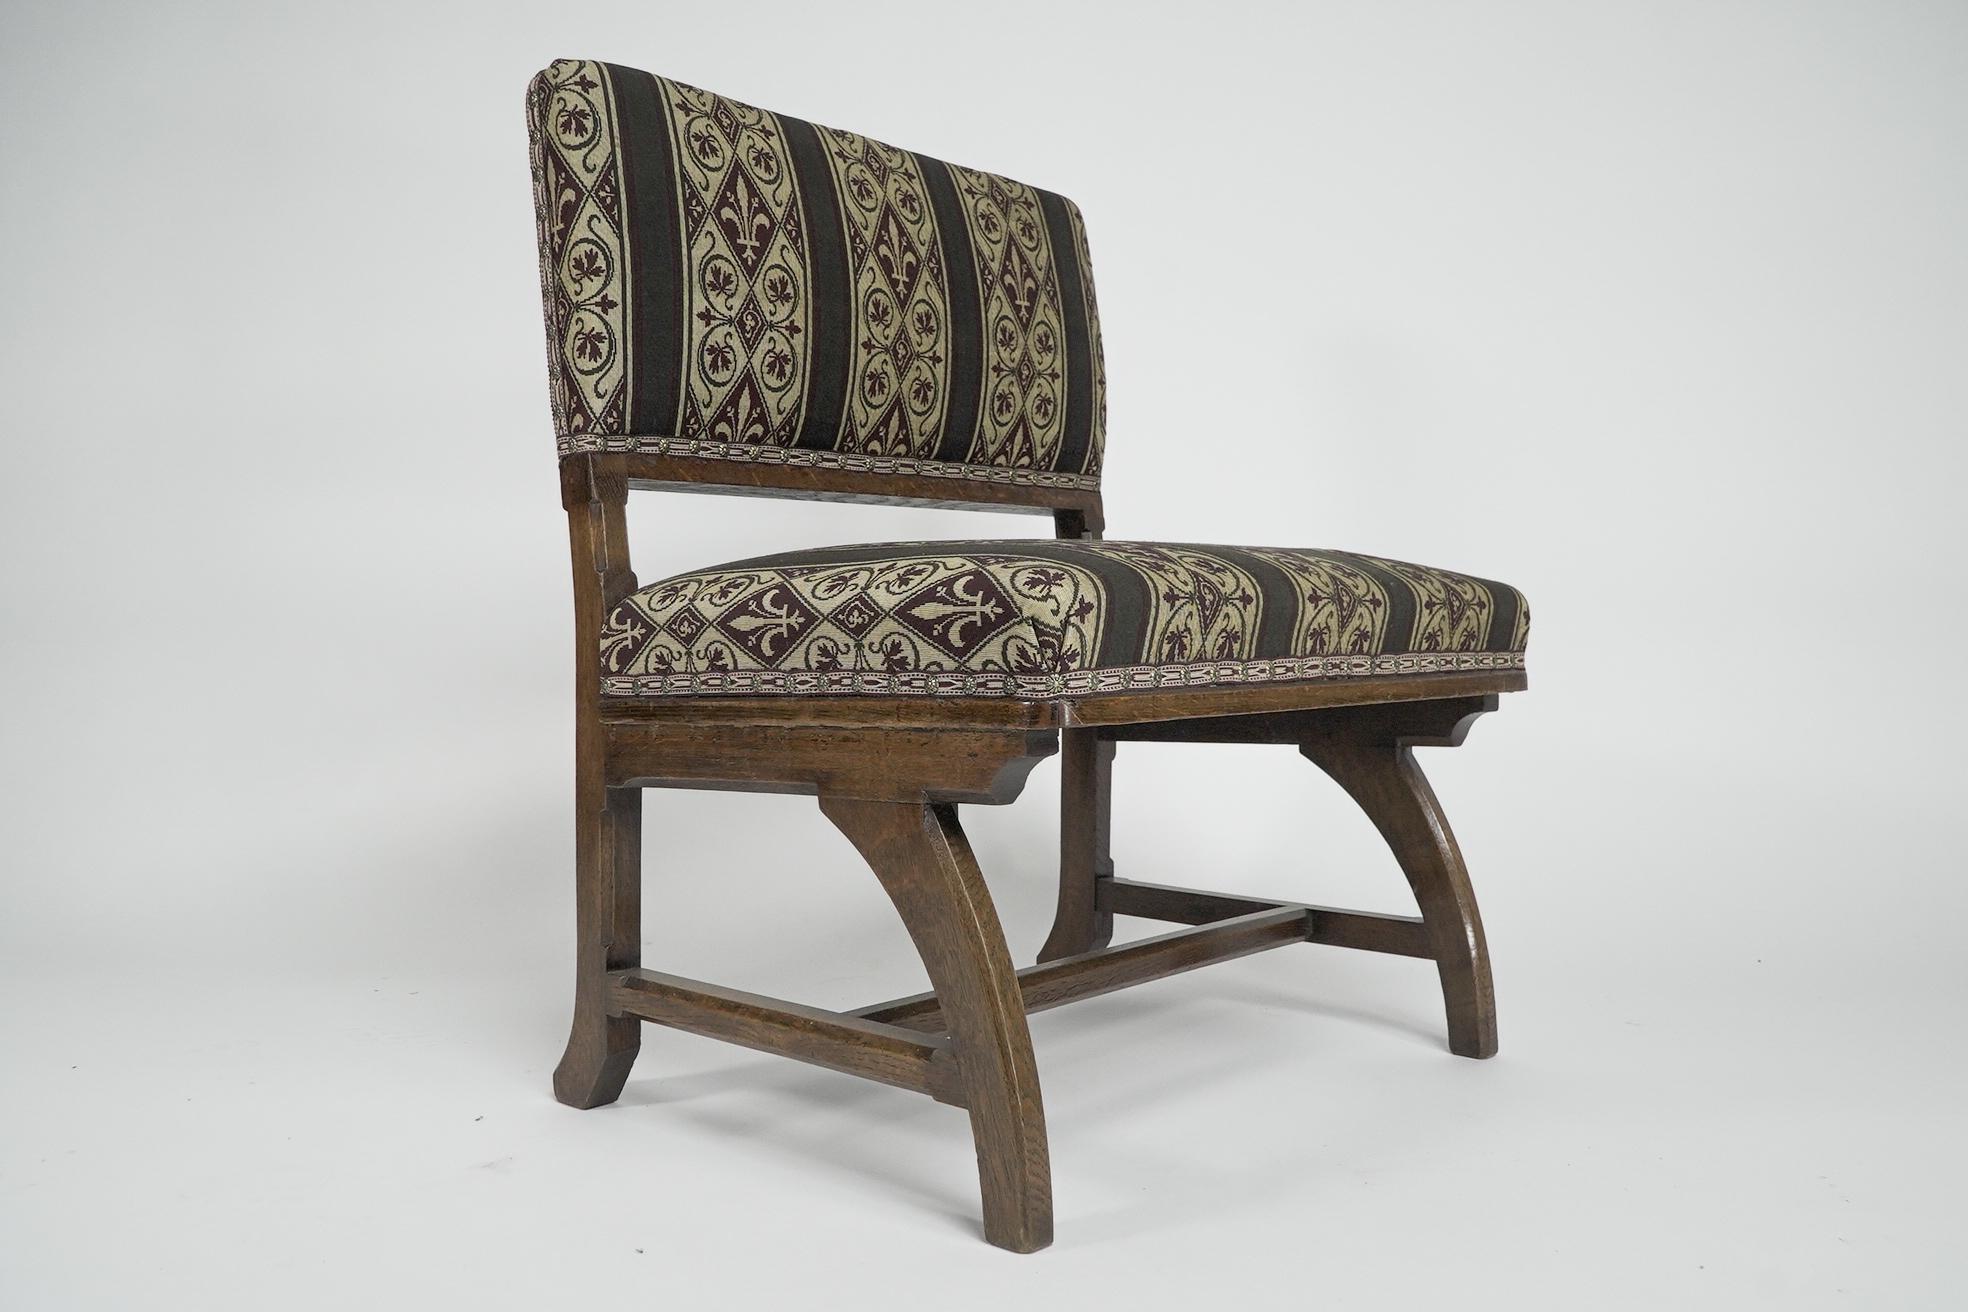 E W Pugin attri. A Gothic Revival oak duet chair with a wider than usual seat. For Sale